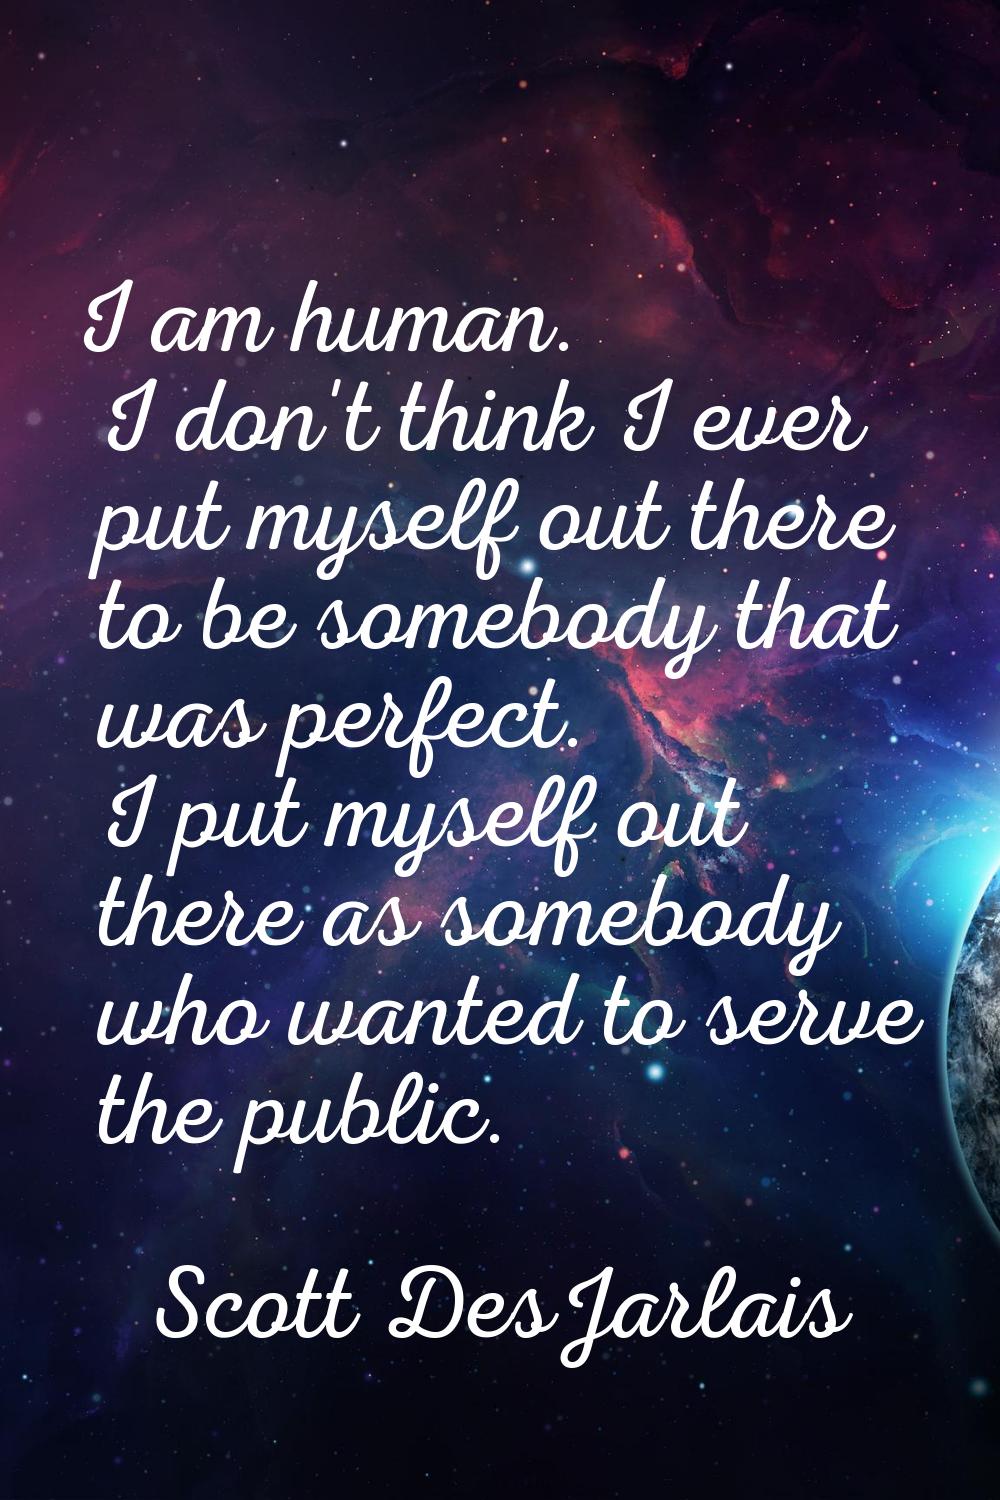 I am human. I don't think I ever put myself out there to be somebody that was perfect. I put myself